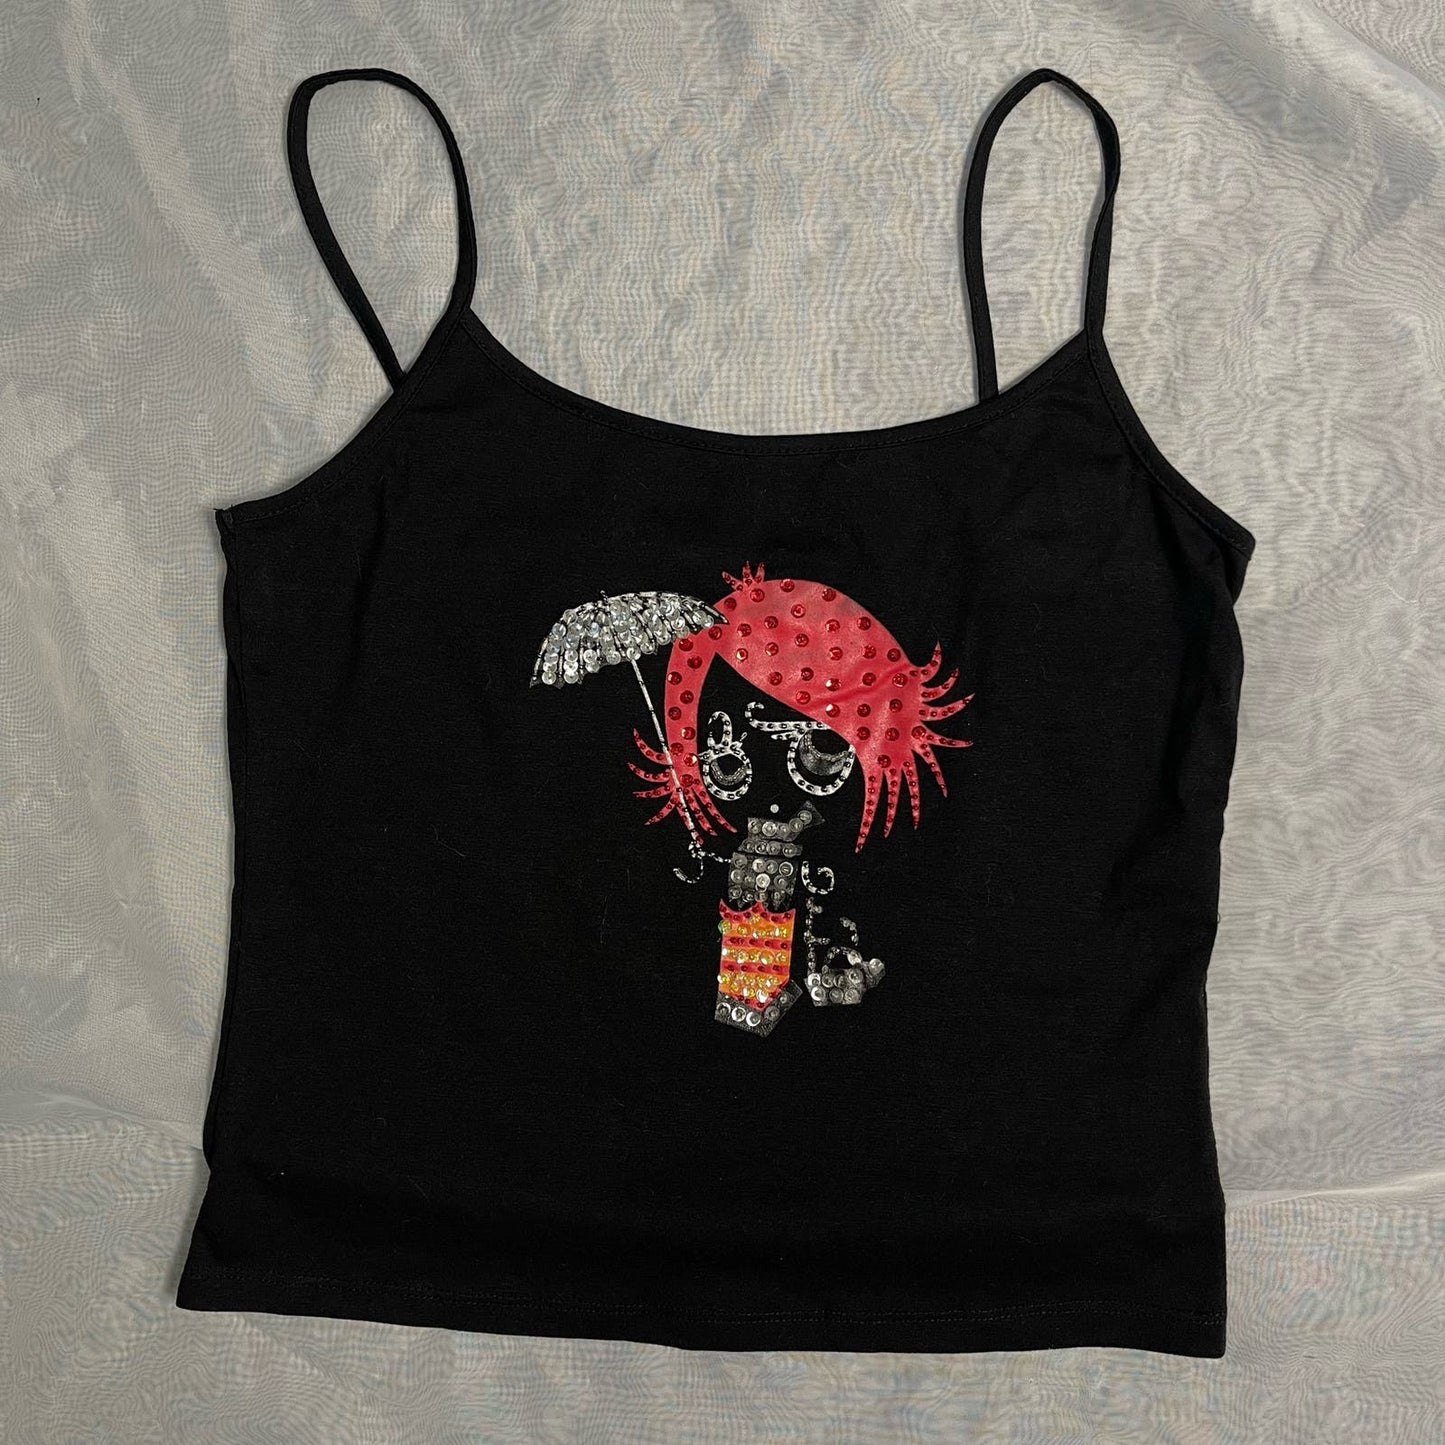 Vintage 00s Black & Red graphic baby tee (S-M) Goth Emo